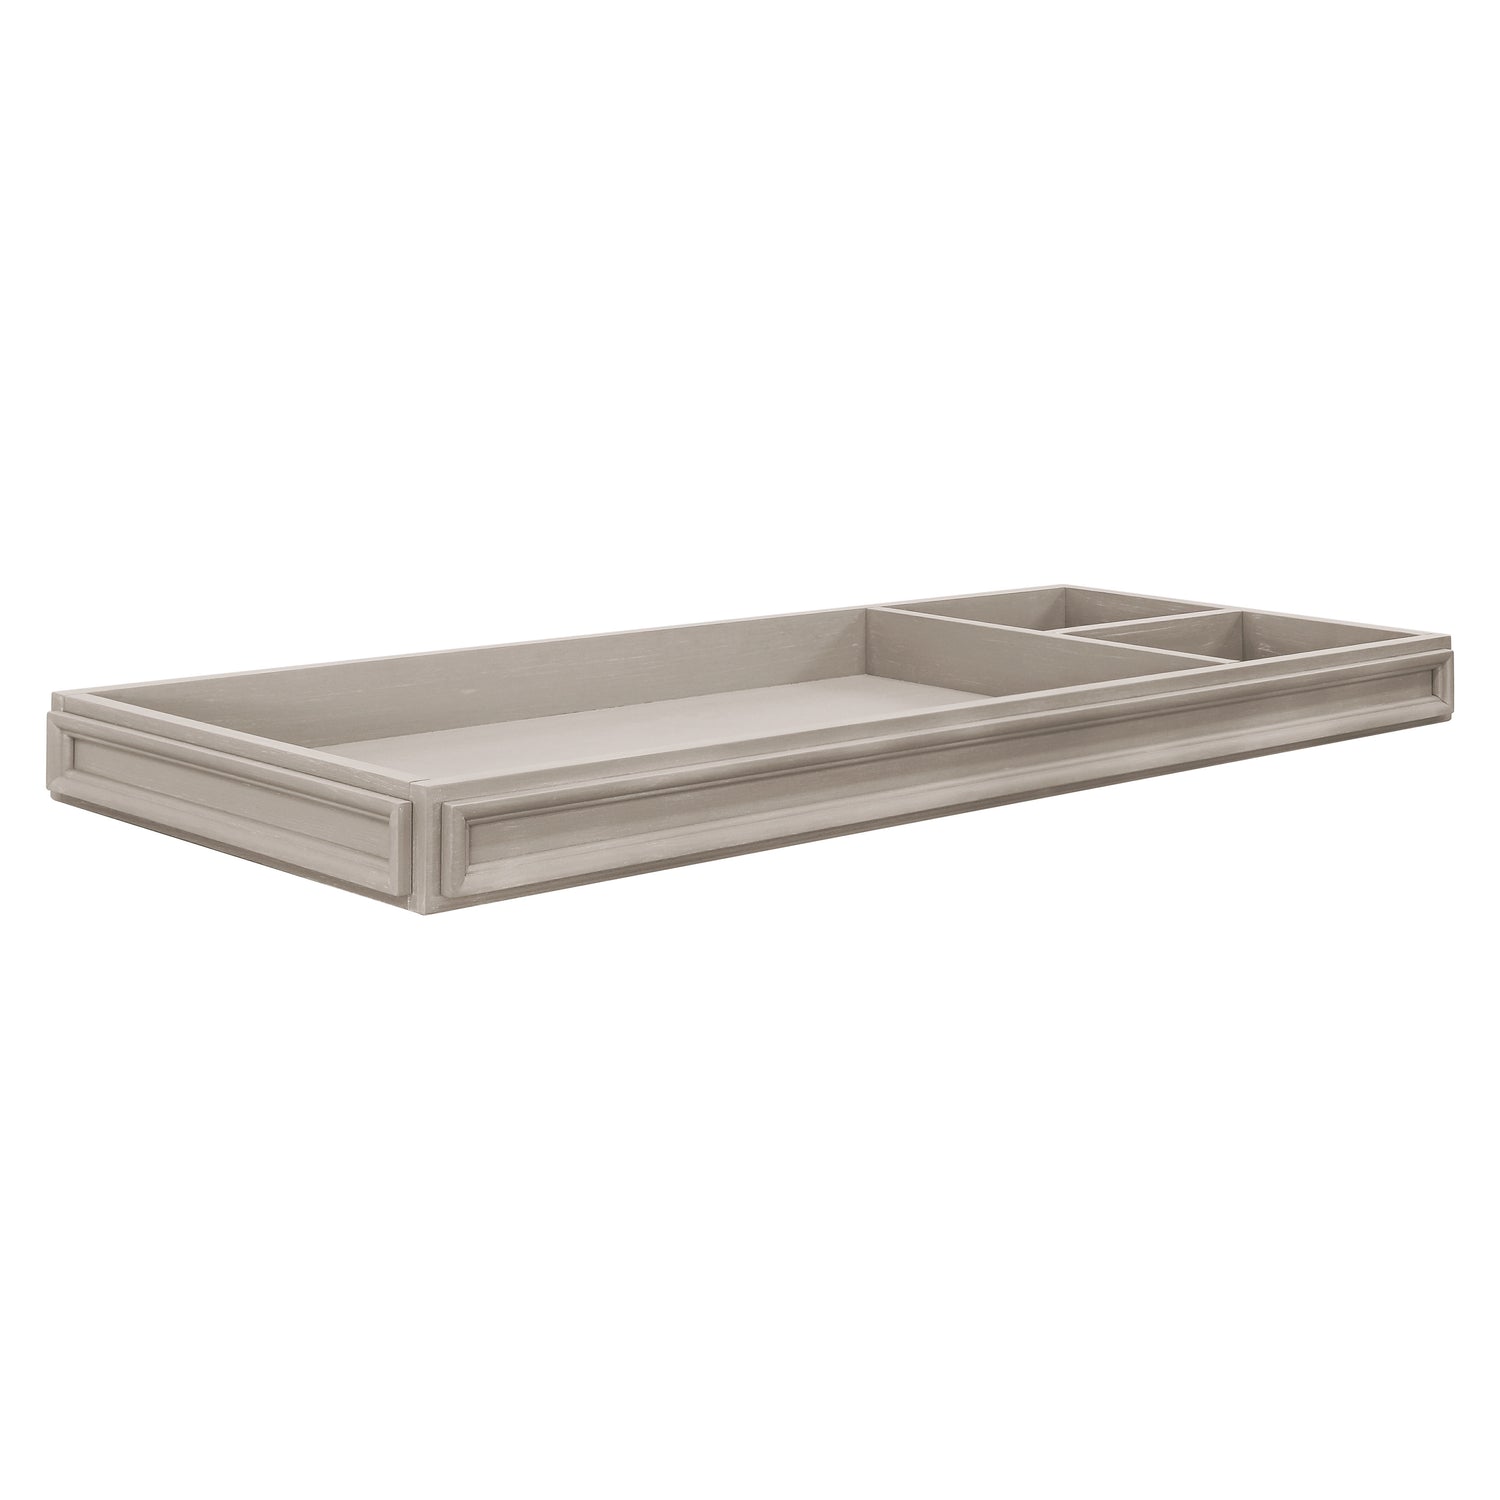 M17319MST,Palermo Removable Changing Tray in Moonstone